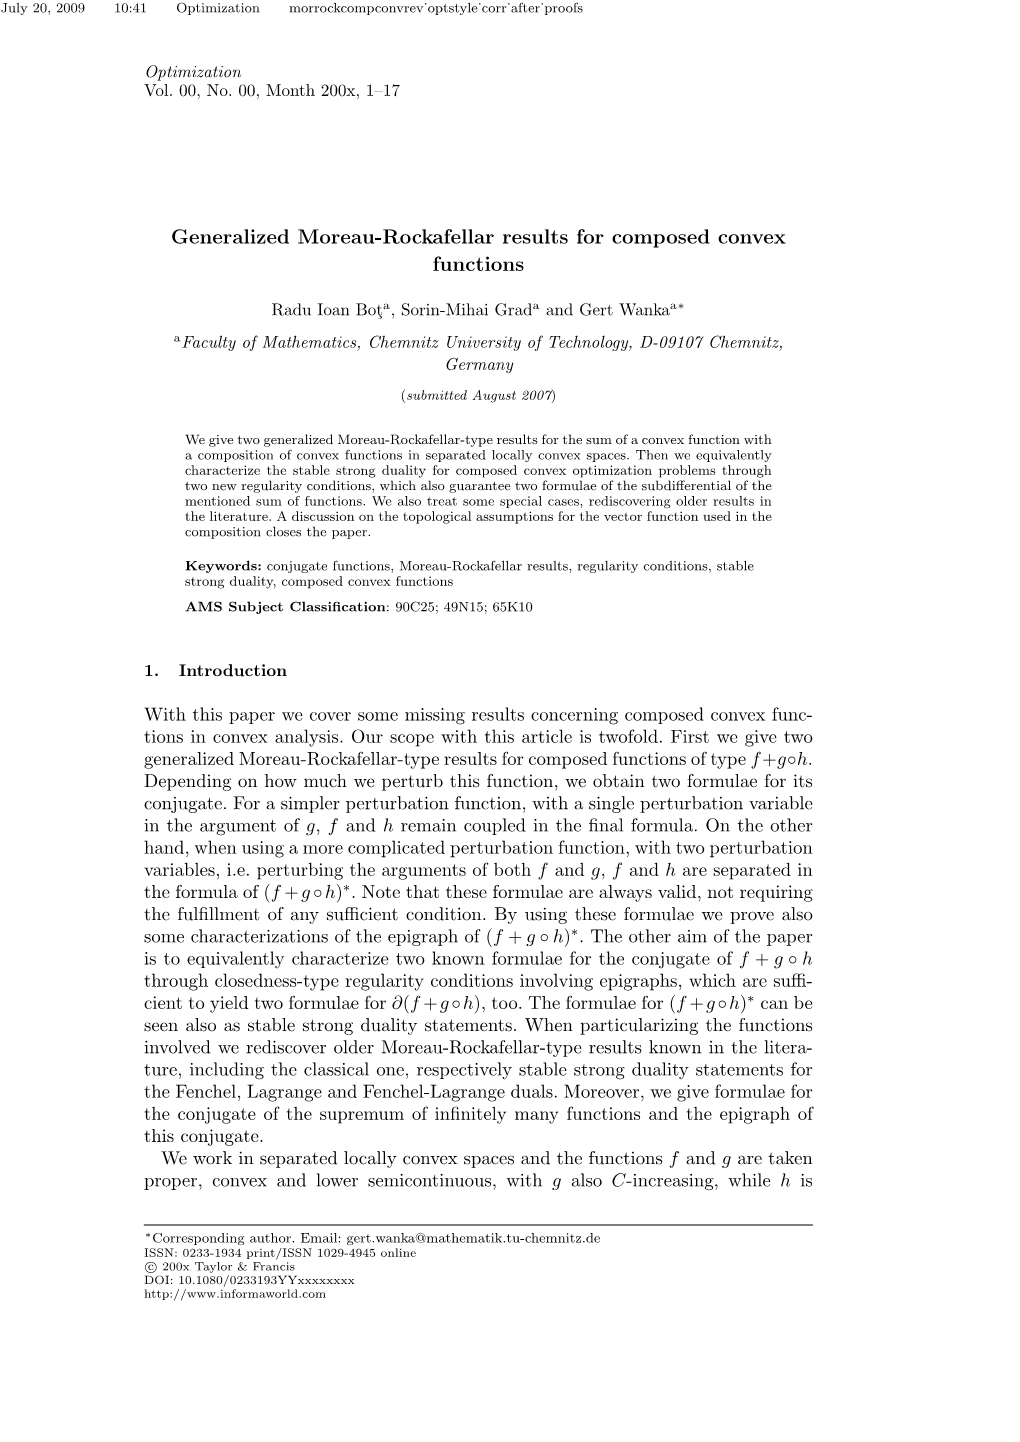 Generalized Moreau-Rockafellar Results for Composed Convex Functions